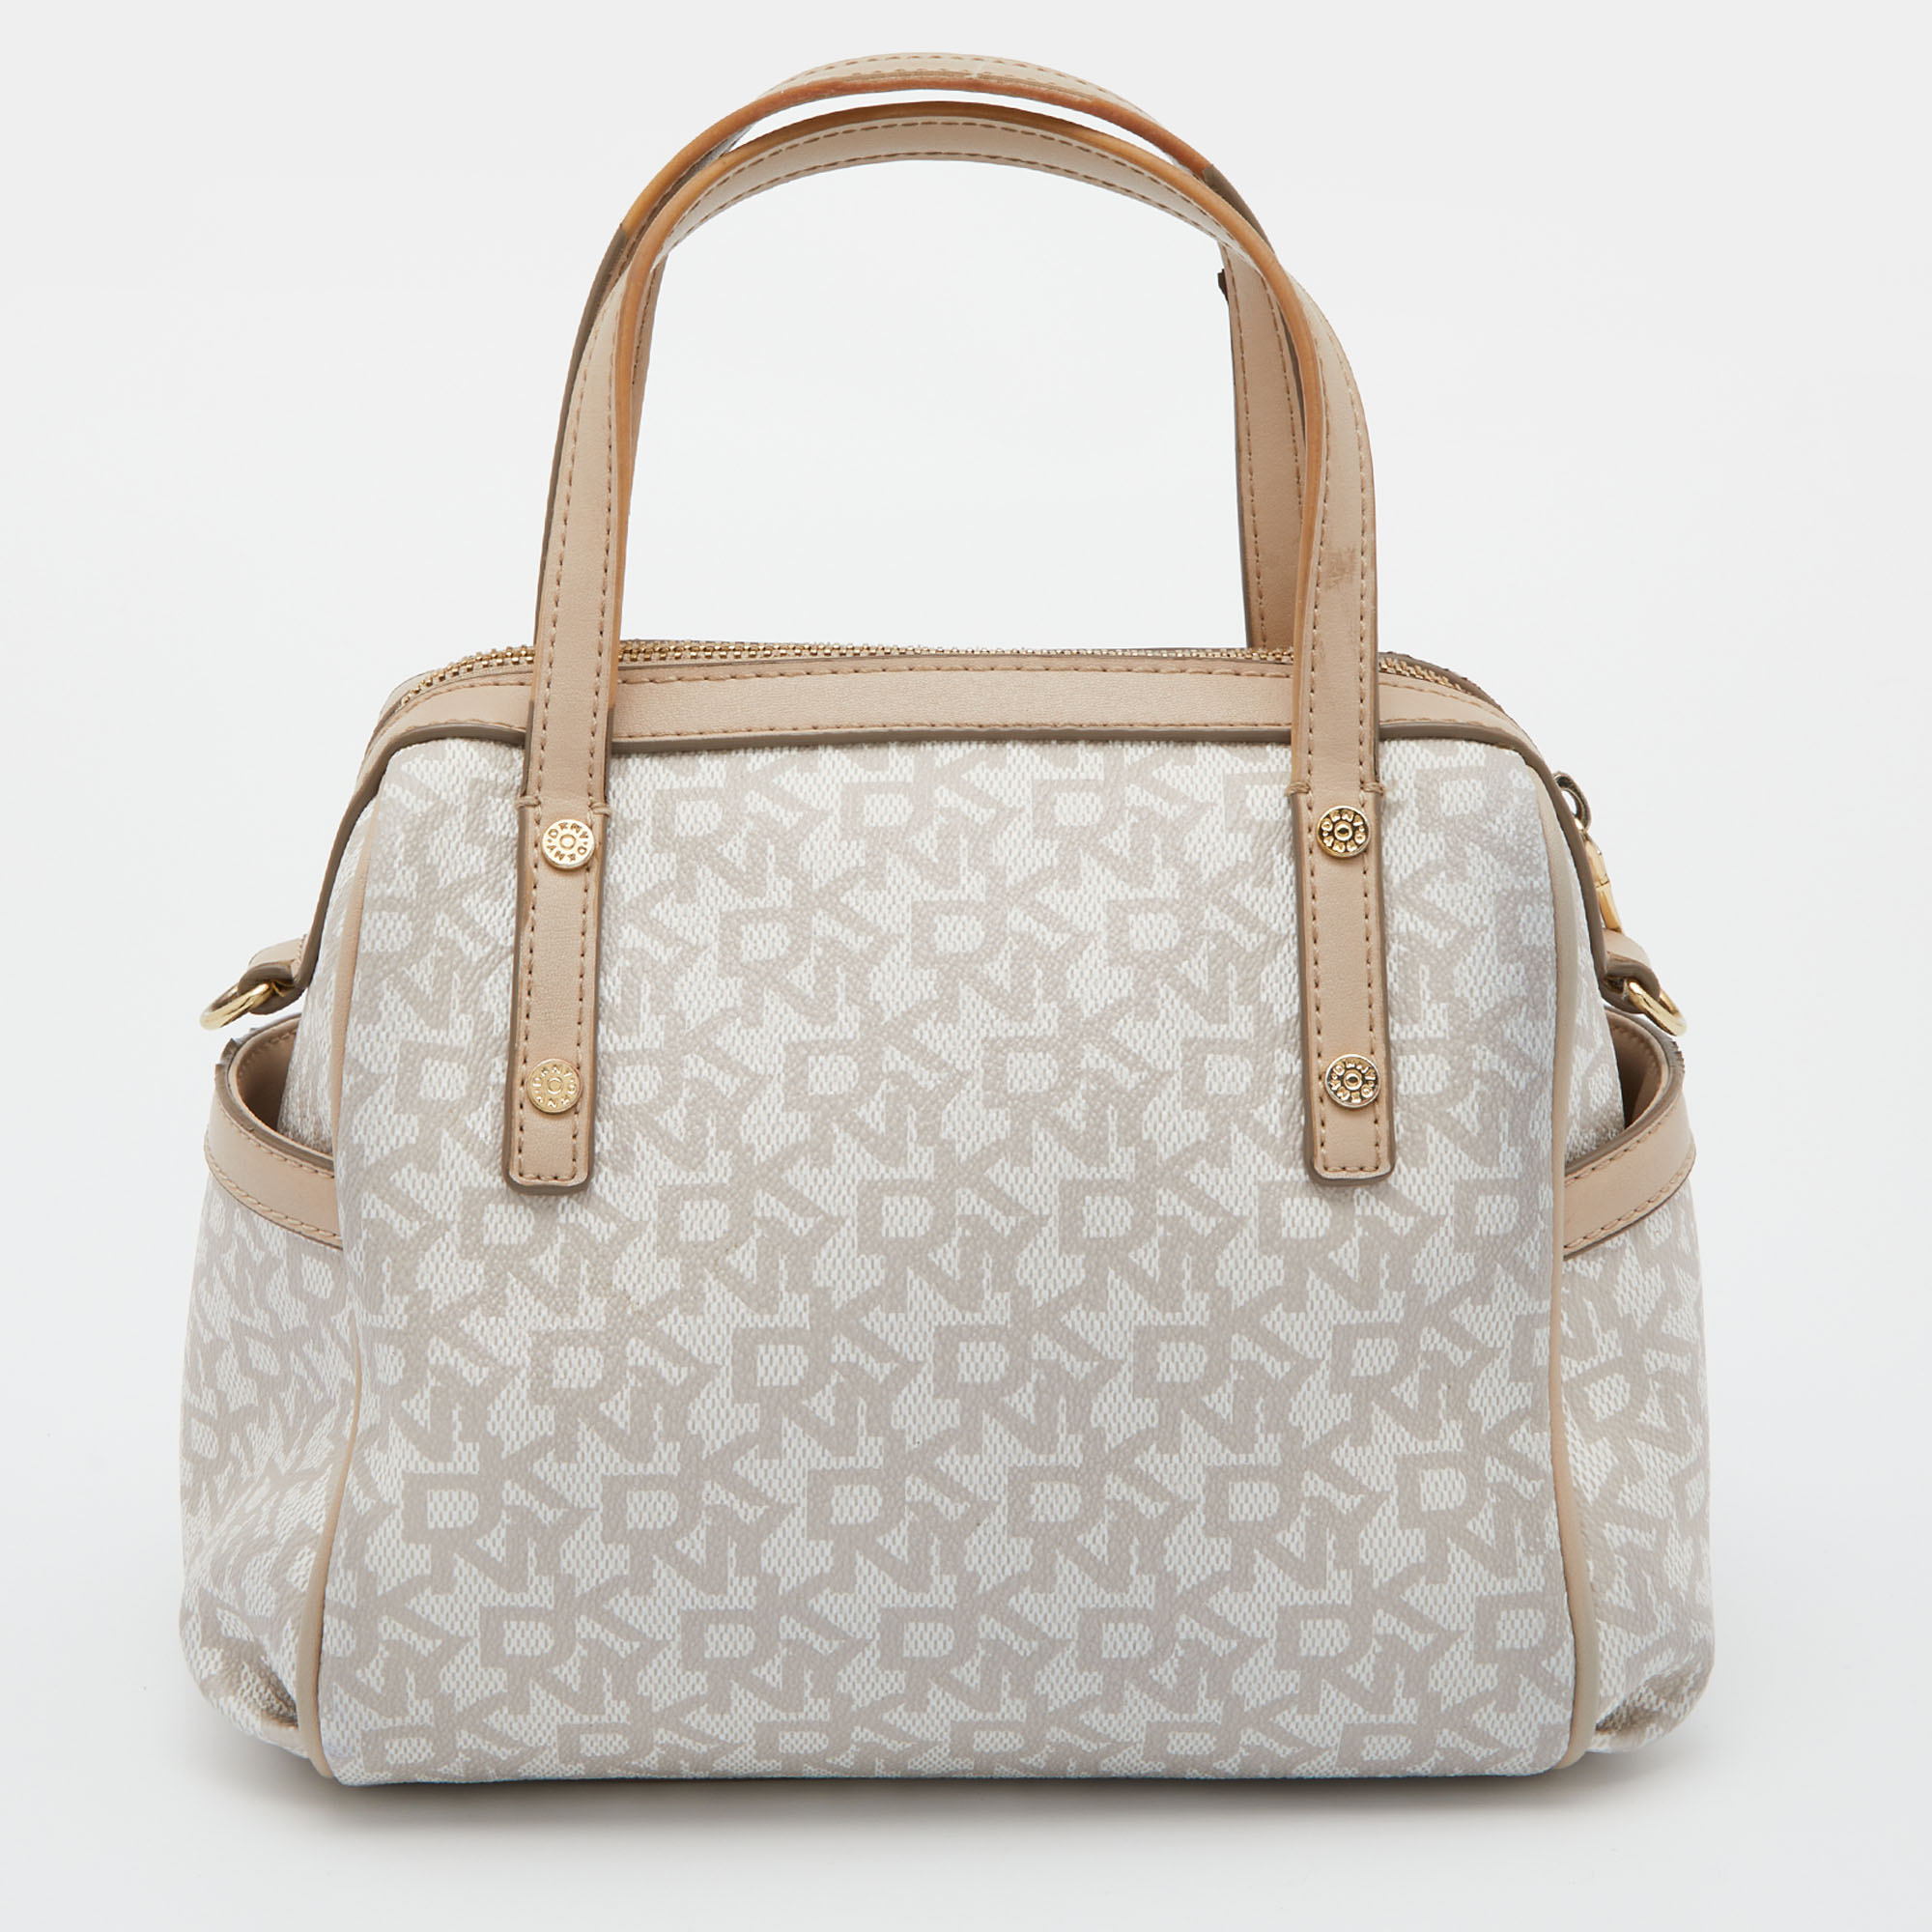 Dkny Beige/Ivory Signature Coated Canvas And Leather Satchel